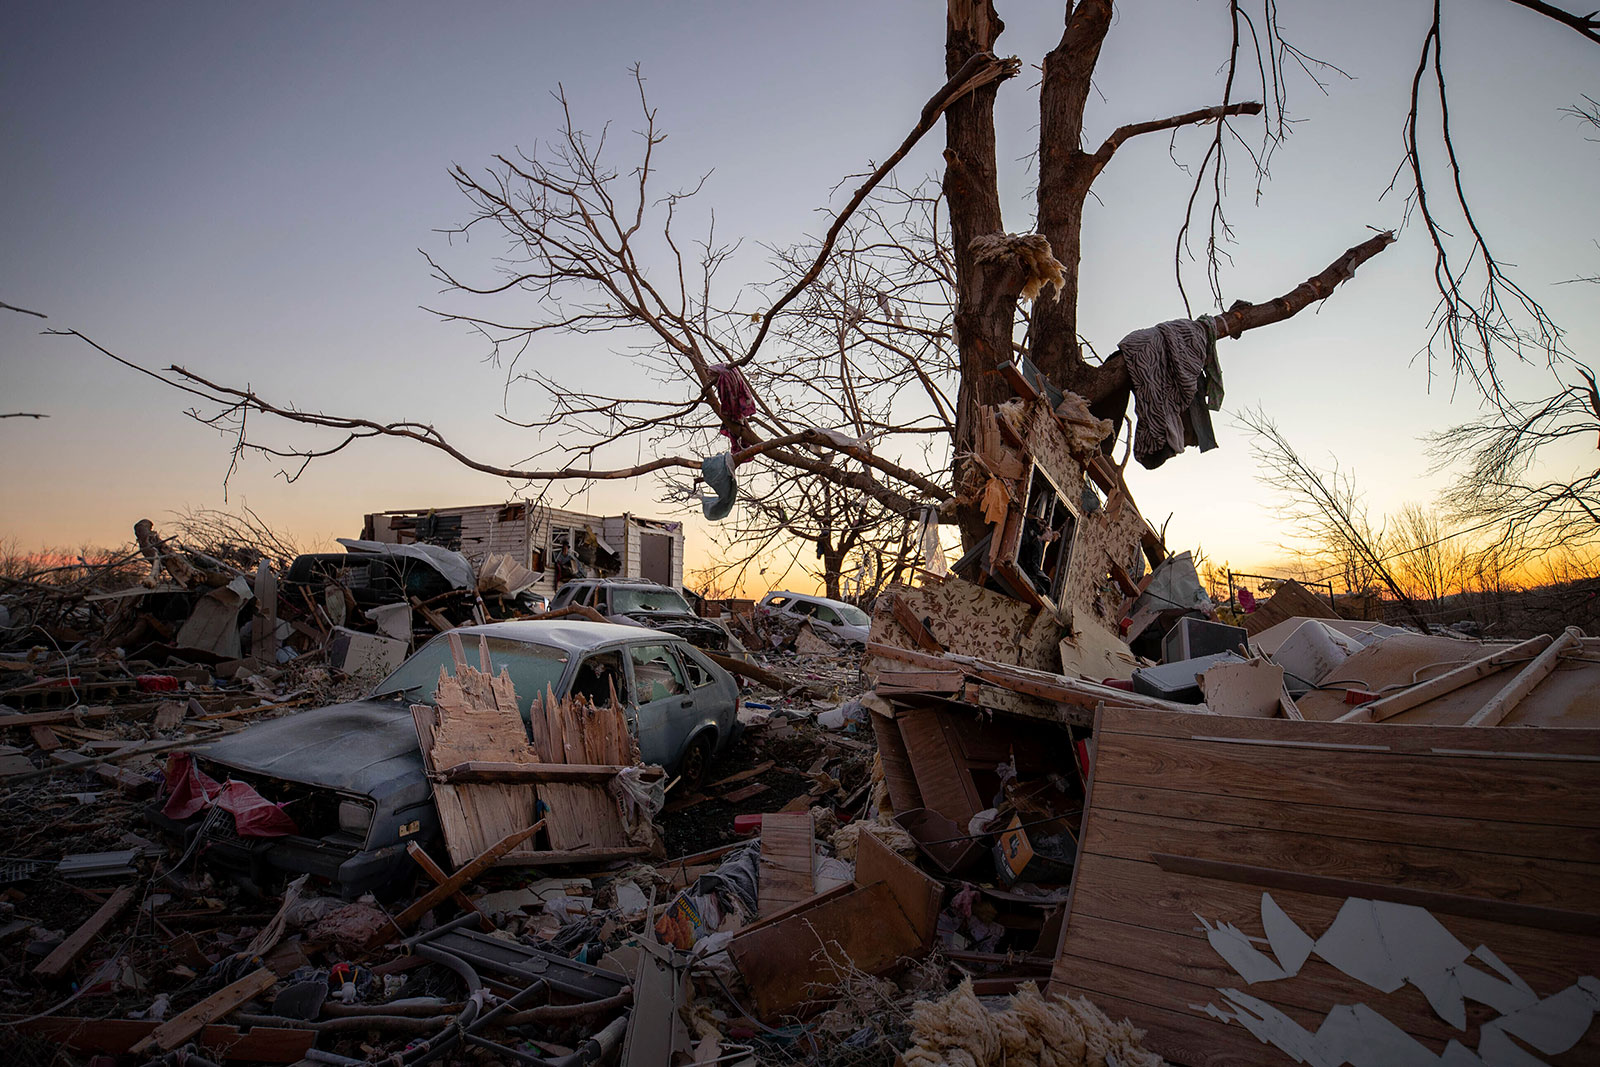 A car sits among debris from a destroyed home in Dawson Springs, Kentucky, on December 12.